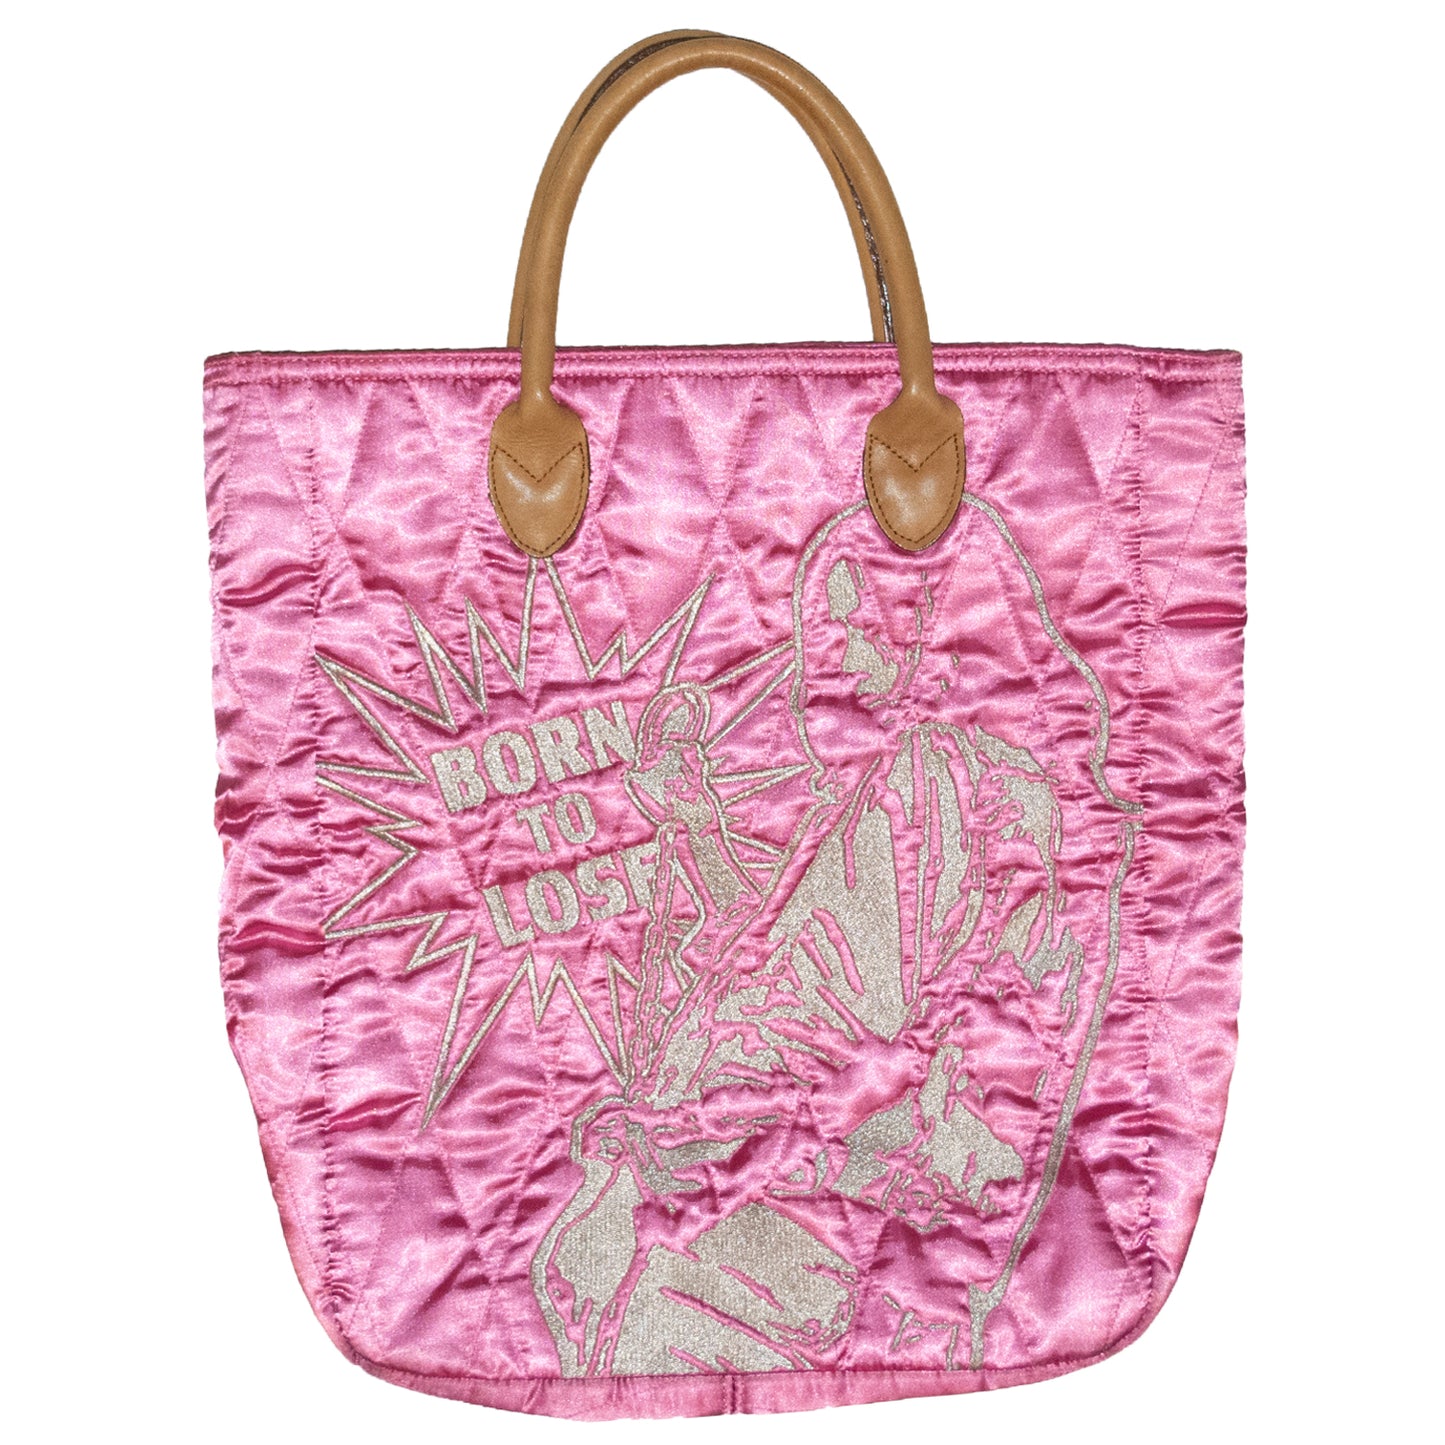 Hysteric Glamour Born To Lose Tote Bag